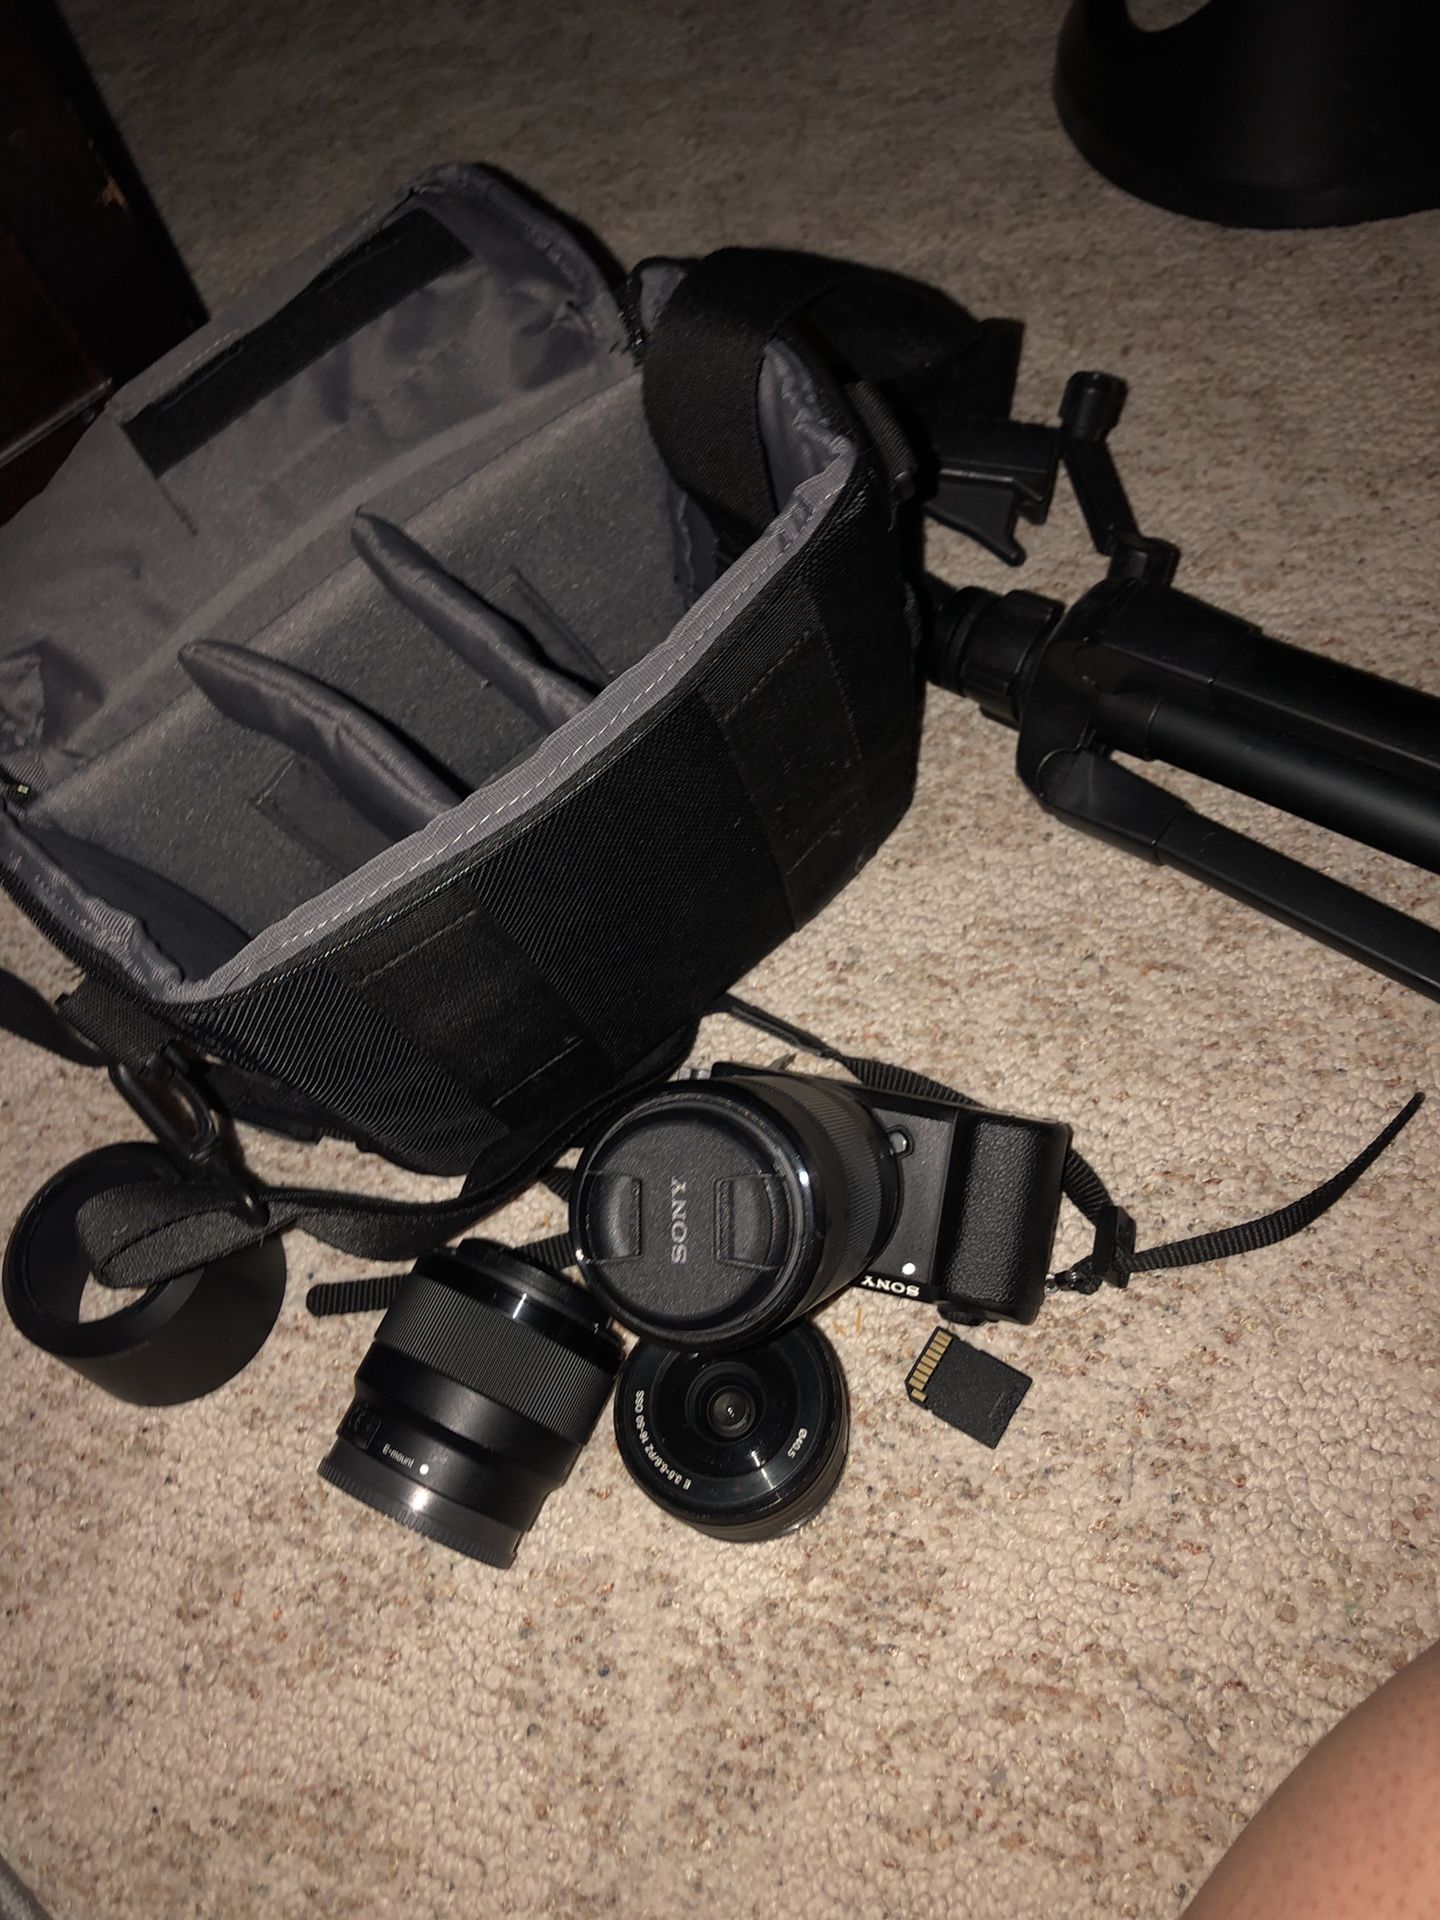 Sony a5100 bundle or can sell lenses separate